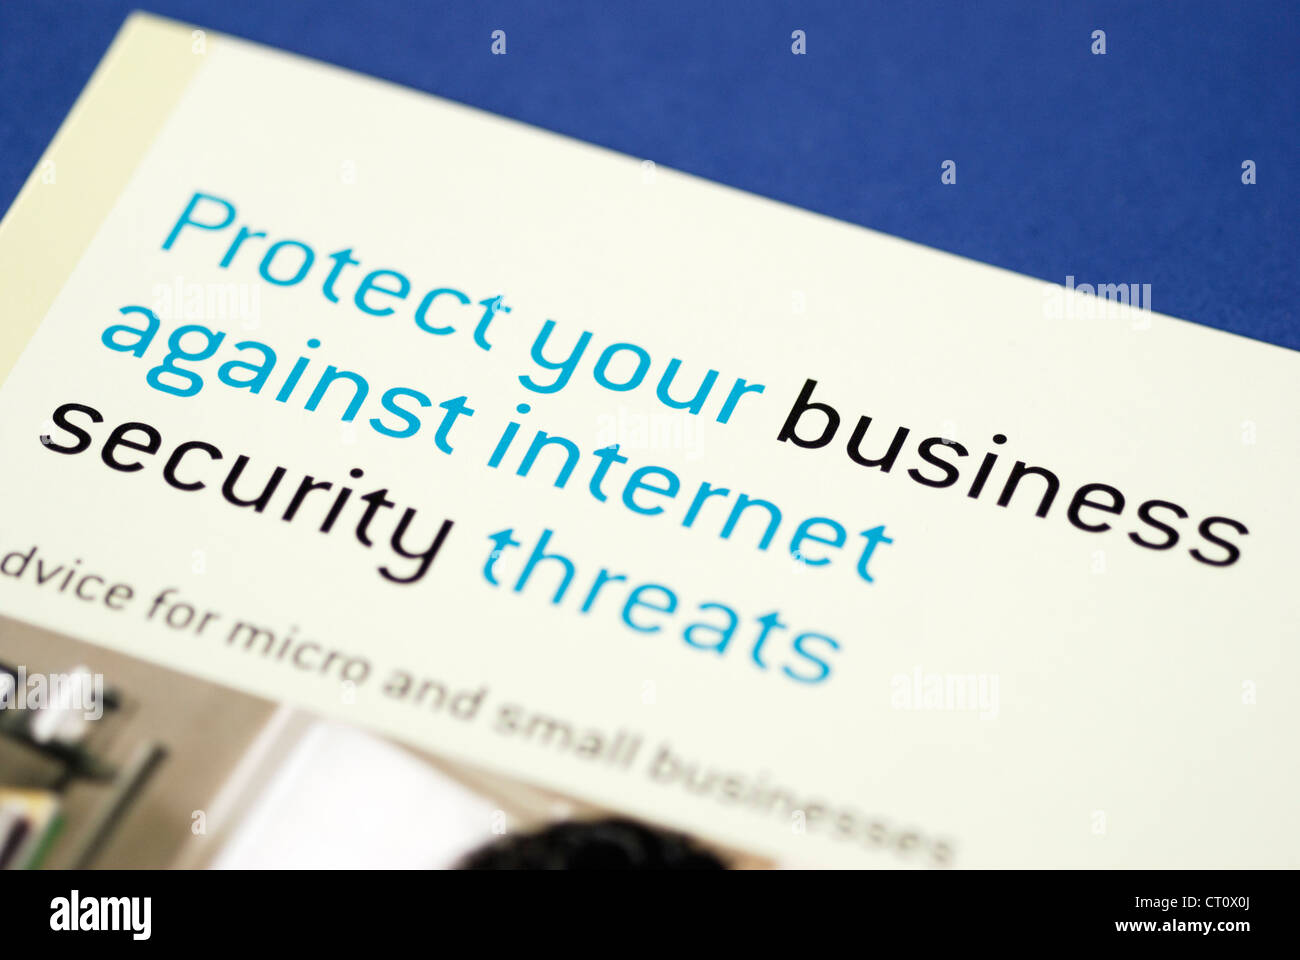 Leaflet about protecting your business against internet security threats Stock Photo